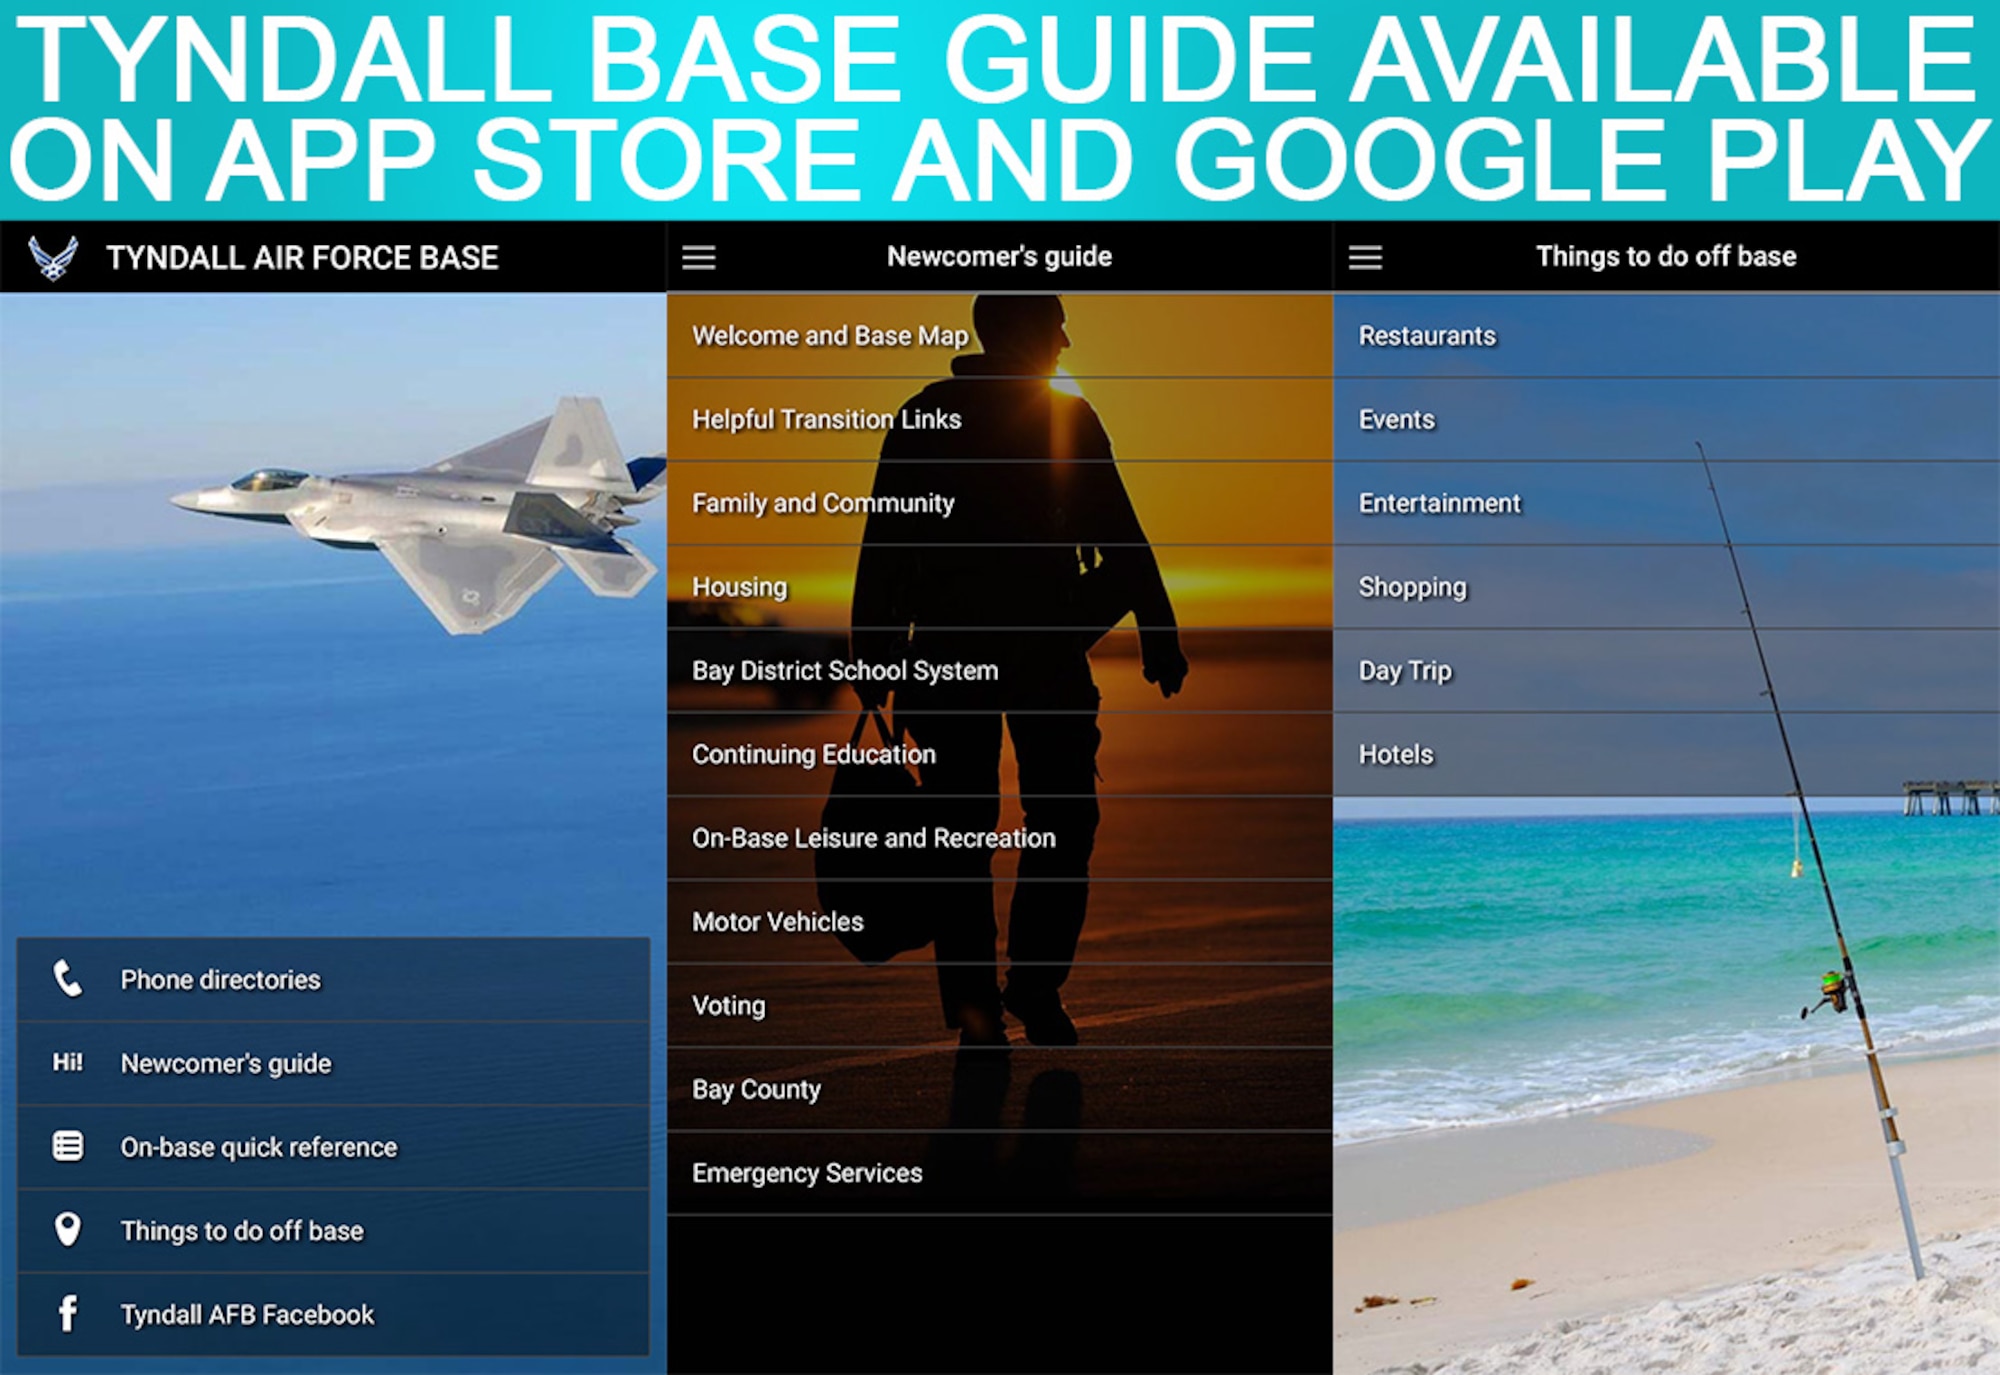 The Tyndall Base Guide is available on the Apple App Store and Google Play.